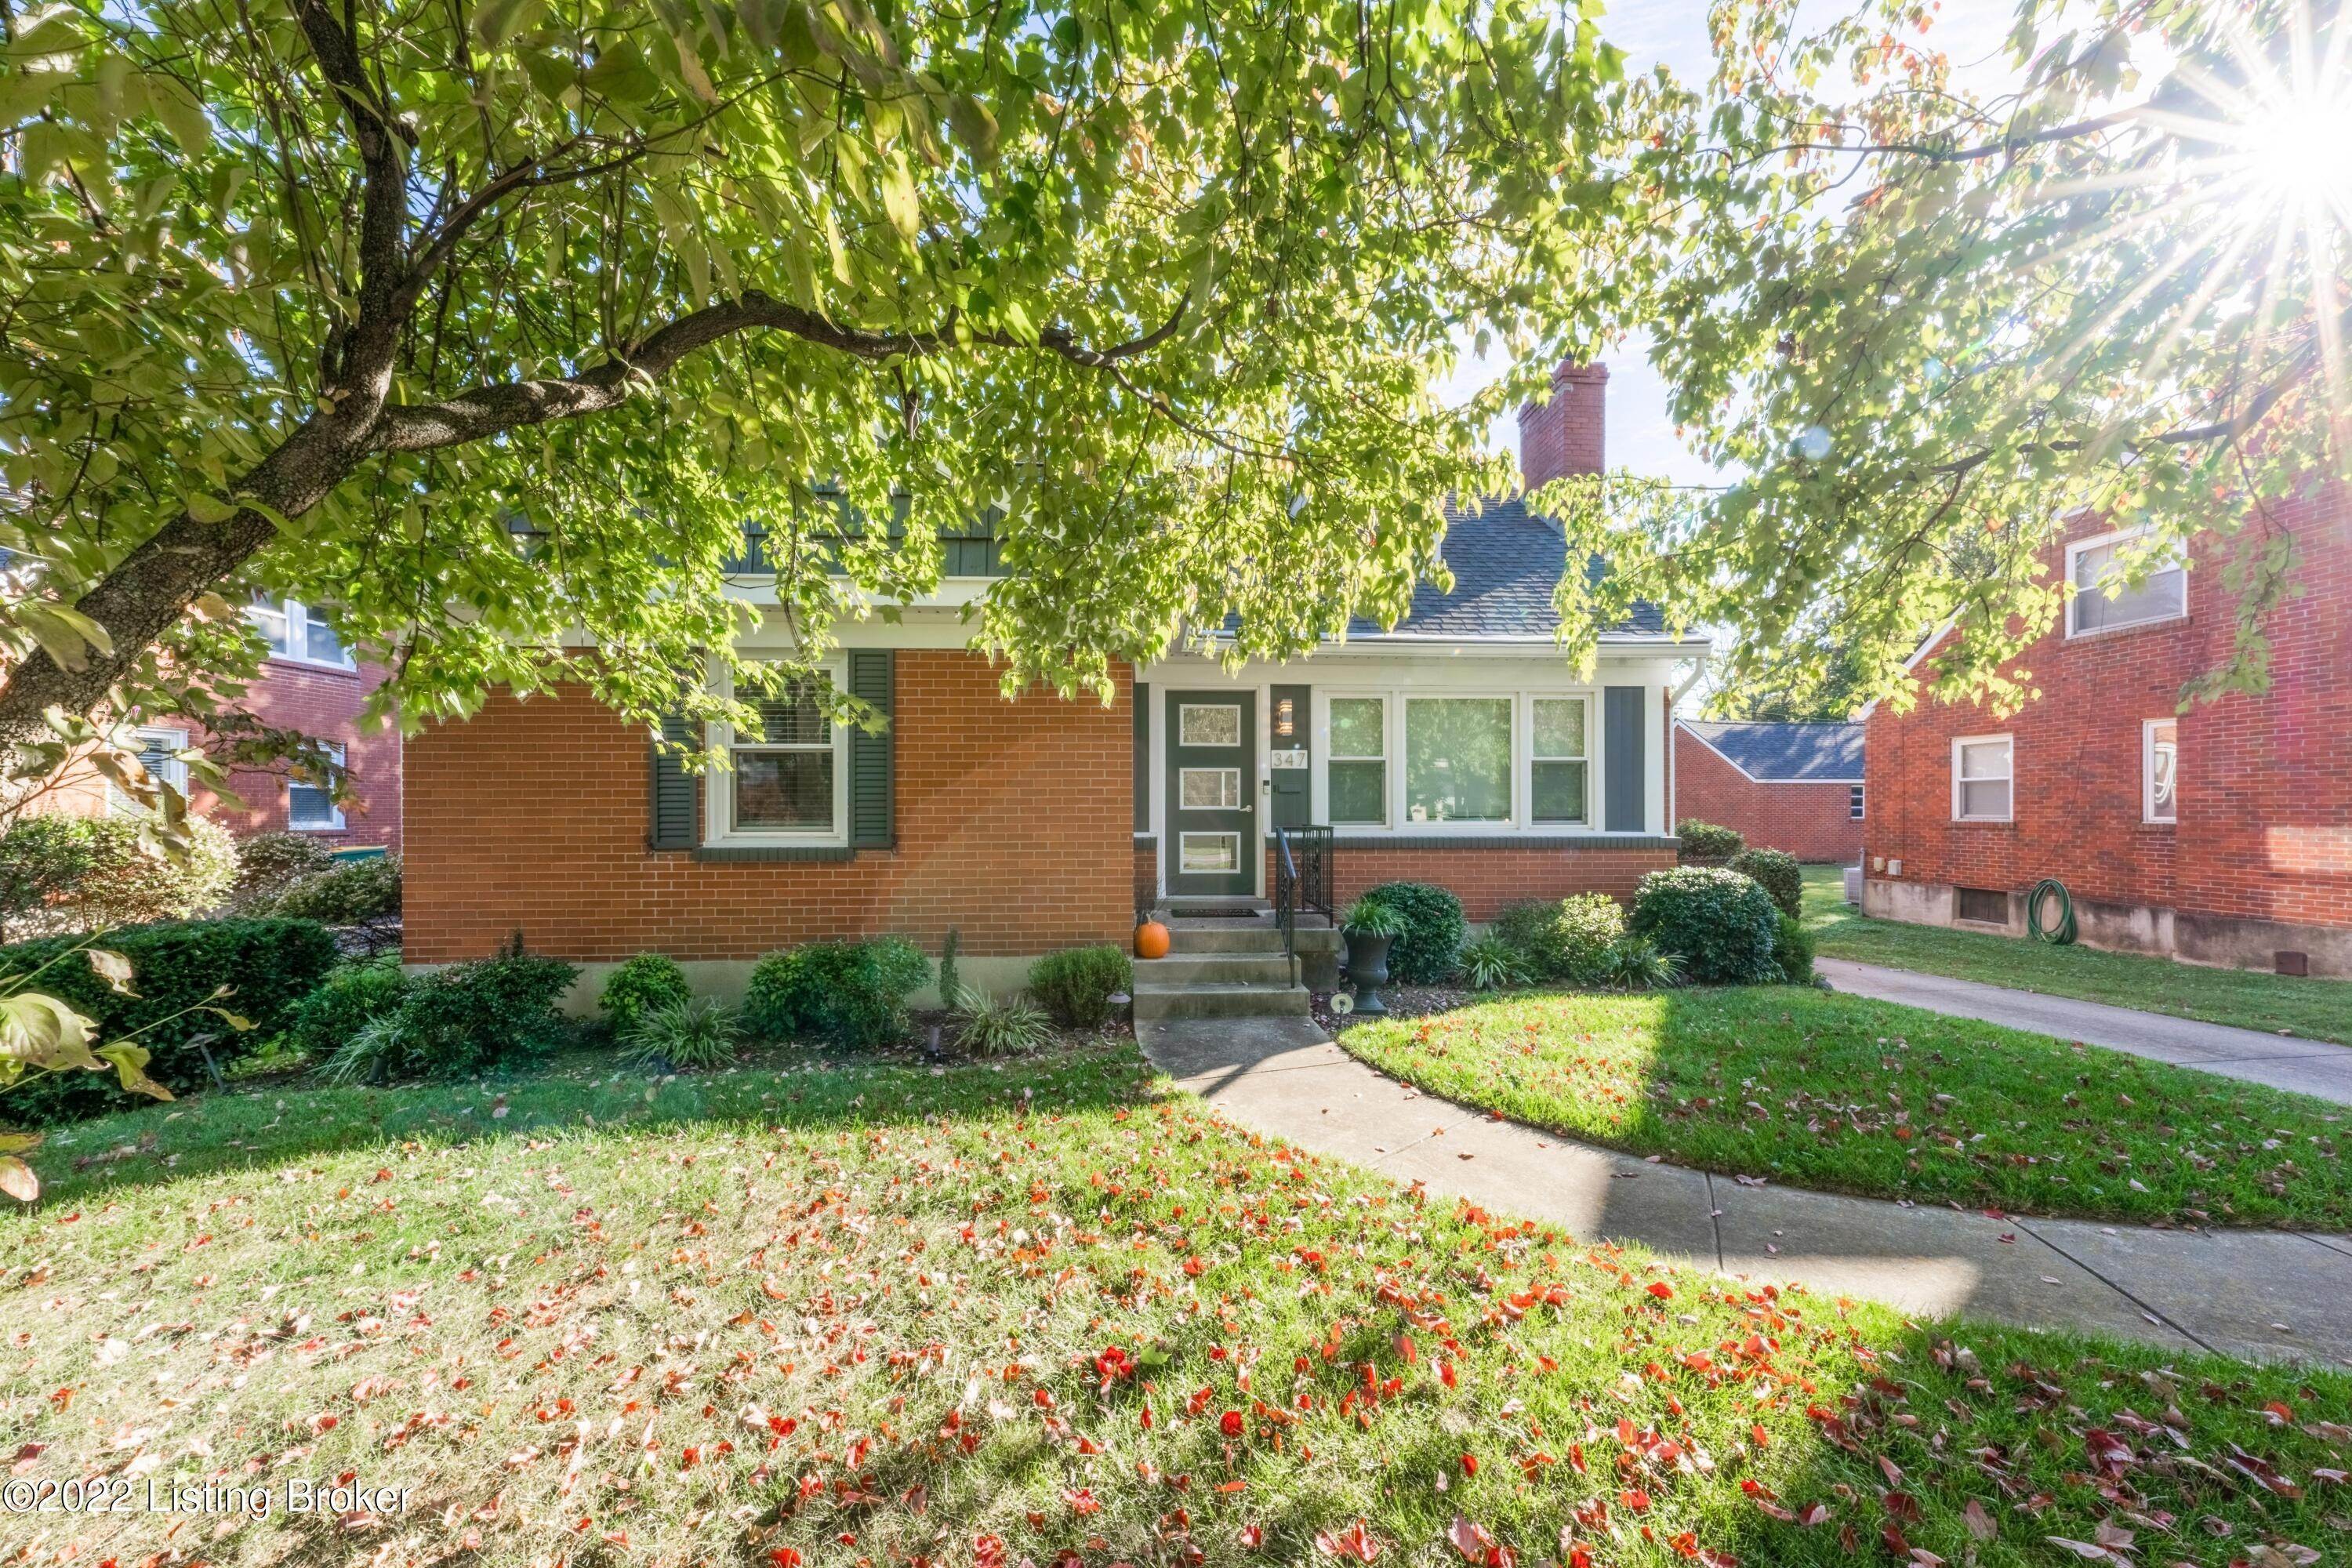 47. Single Family at Louisville, KY 40207